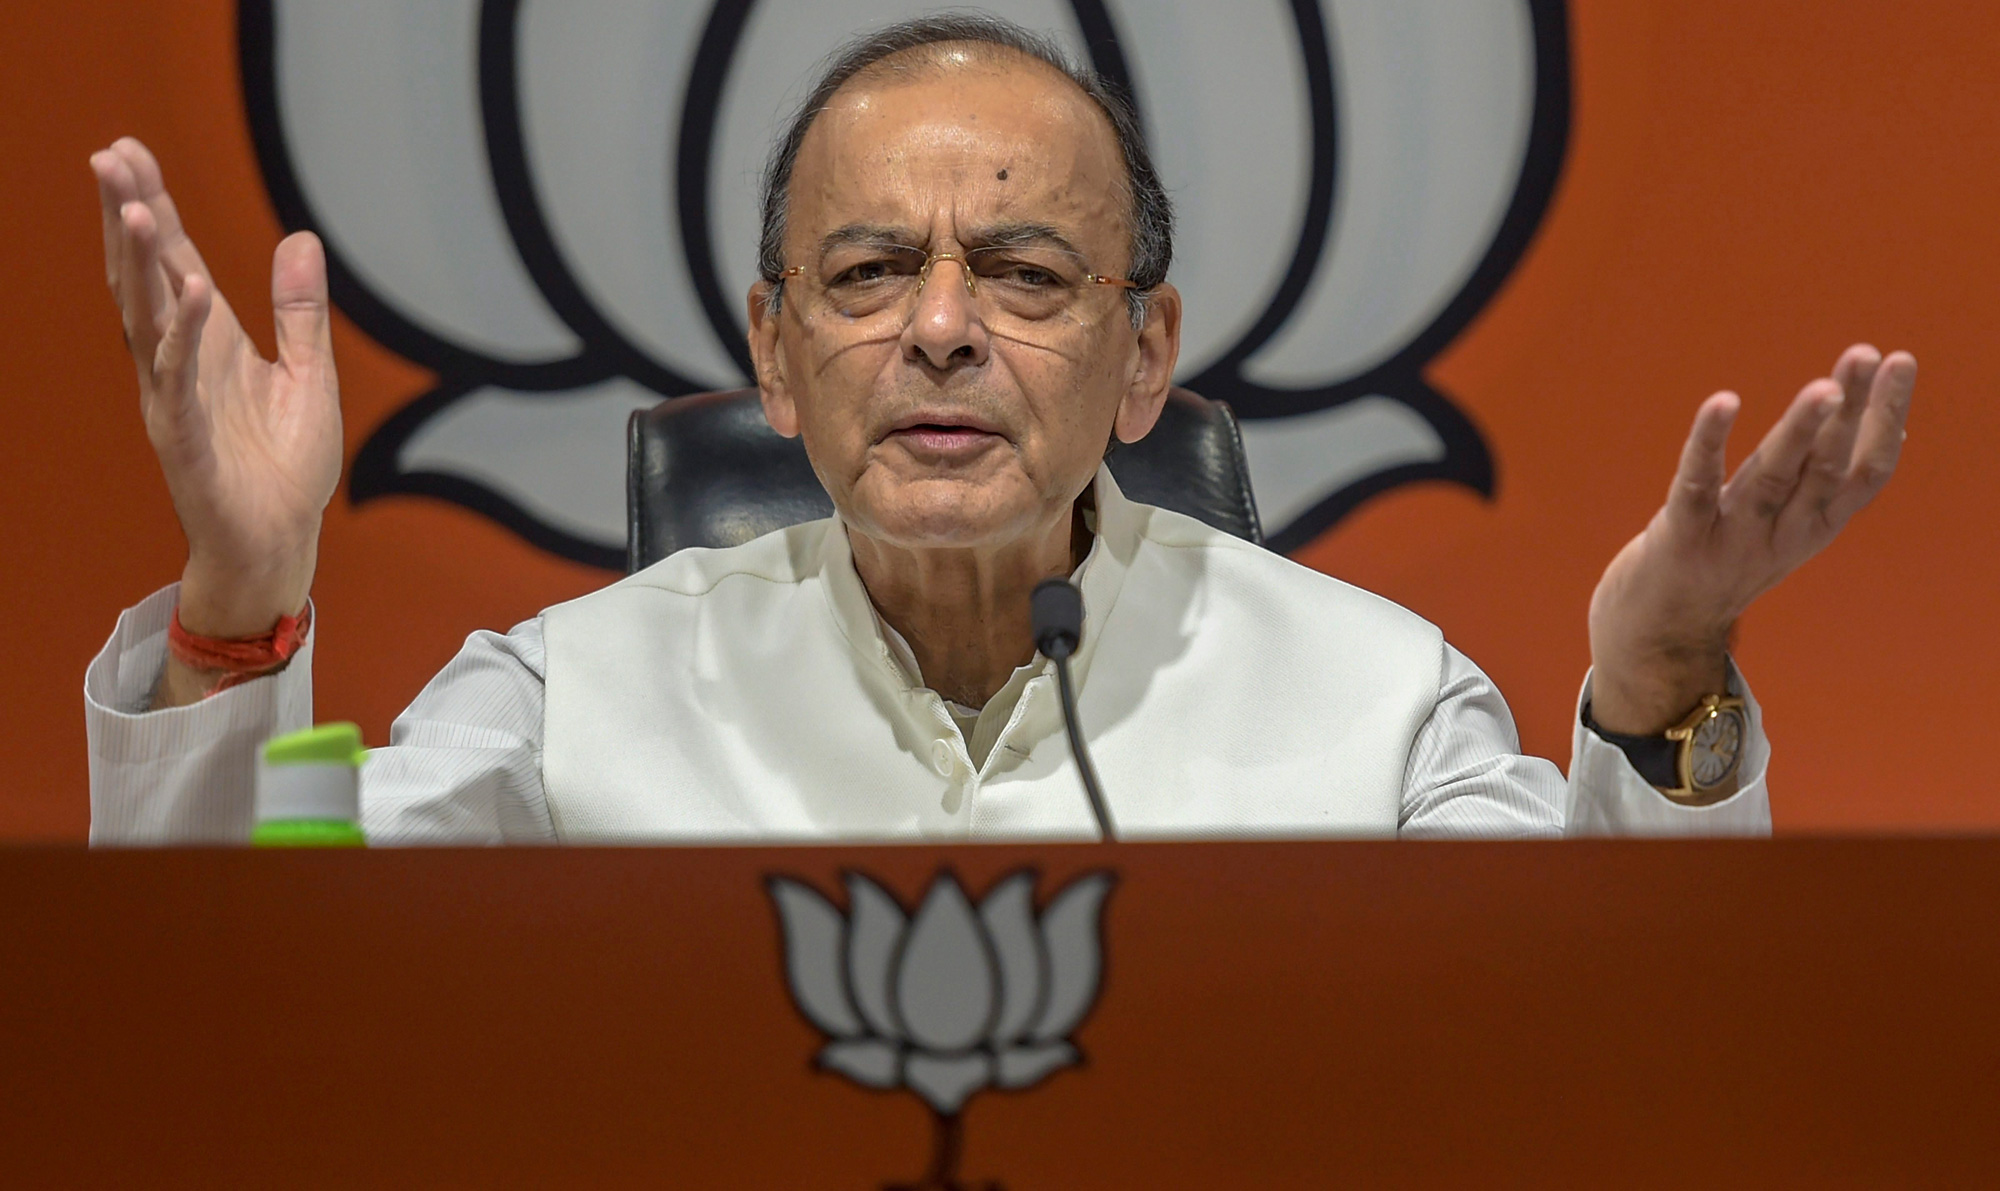 Union minister and BJP leader Arun Jaitley during the launch of the party's election theme songs and other campaign materials for upcoming Lok Sabha polls, at party headquarters in New Delhi on Sunday, April 7, 2019.